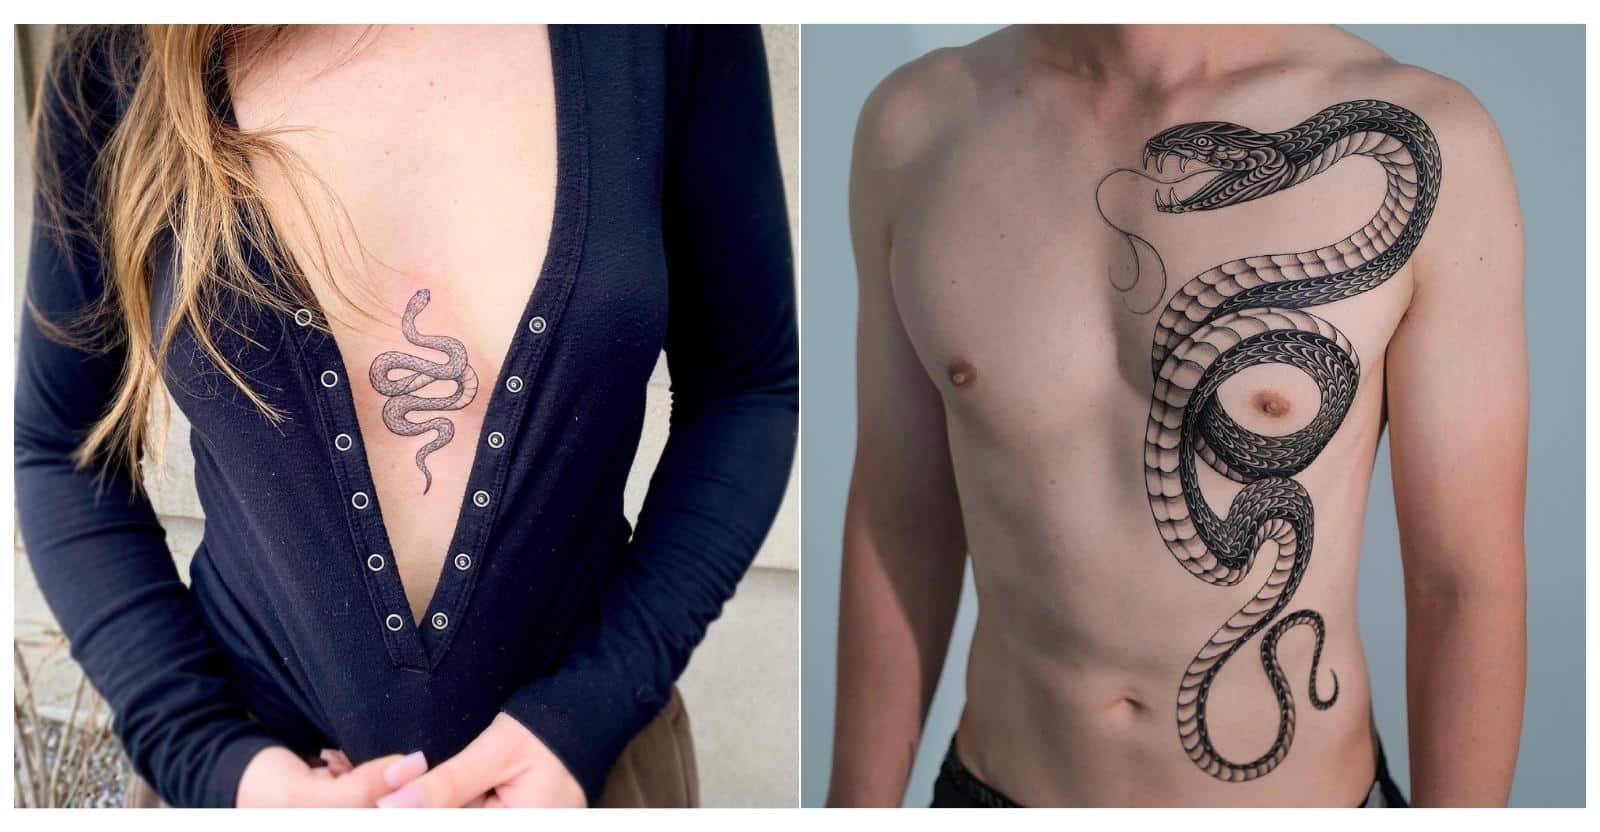 Artistry of the Snake Tattoo